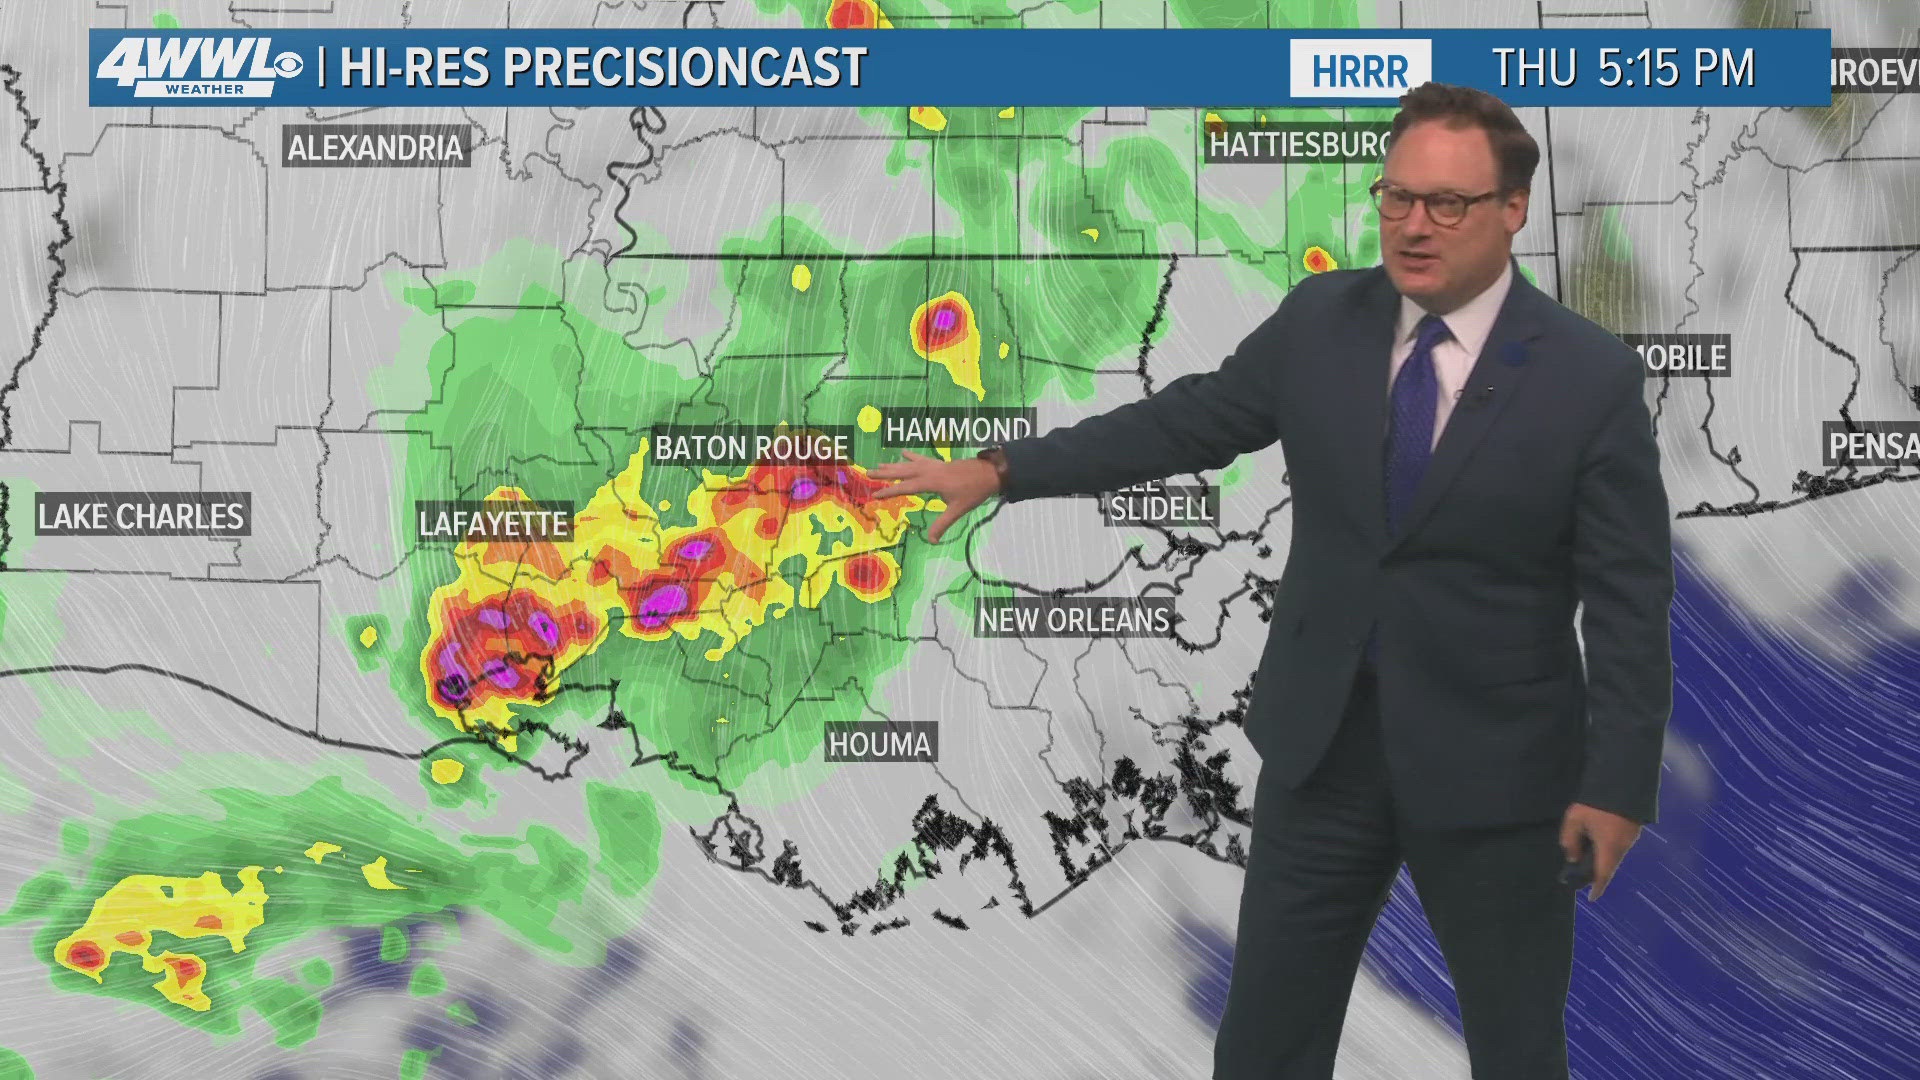 Chief Meteorologist Chris Franklin says rain chances tomorrow remain uncertain, but is certain about heat next week.